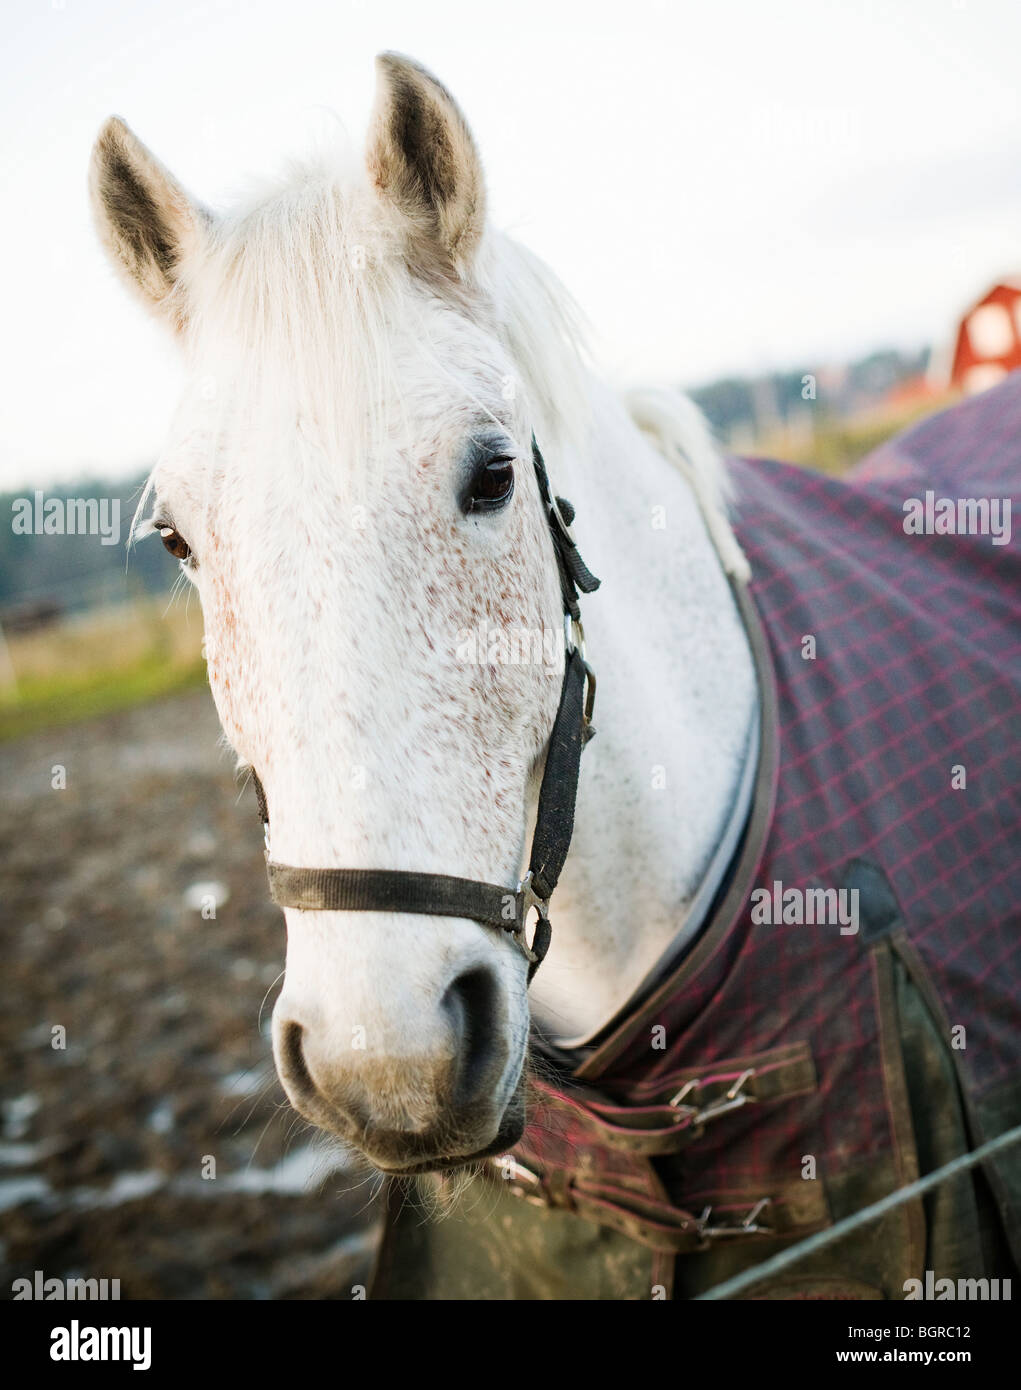 A white horse, close-up, Sweden. Stock Photo